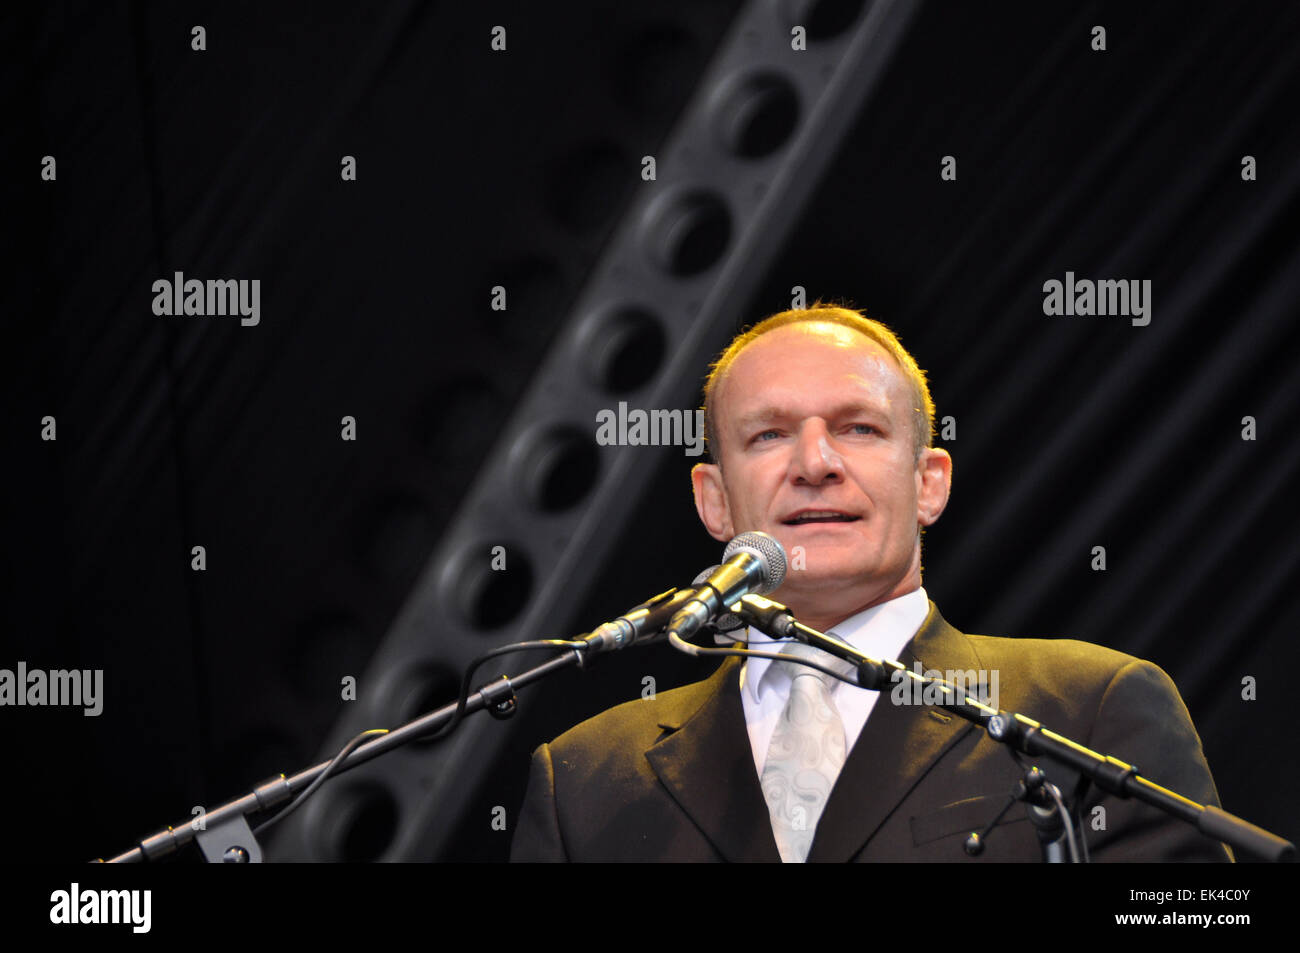 Former rugby World Cup winning captain Francois Pienaar paid tribute to Nelson Mandela at Cape Town’s memorial for Mandela.Cape Town celebrated Mandela with a concert in The Cape Town Stadium. Crowds danced and sang to Johnny Clegg, Freshly Ground, Annie Lennox, Bala brothers and more. Speakers included minister Trevor Manual and Premier of the Western cape helen Zille.The feeling was one of joy and unity for the rainbow nation as all races, ages and gender attended the tribute for Mandela. Stock Photo